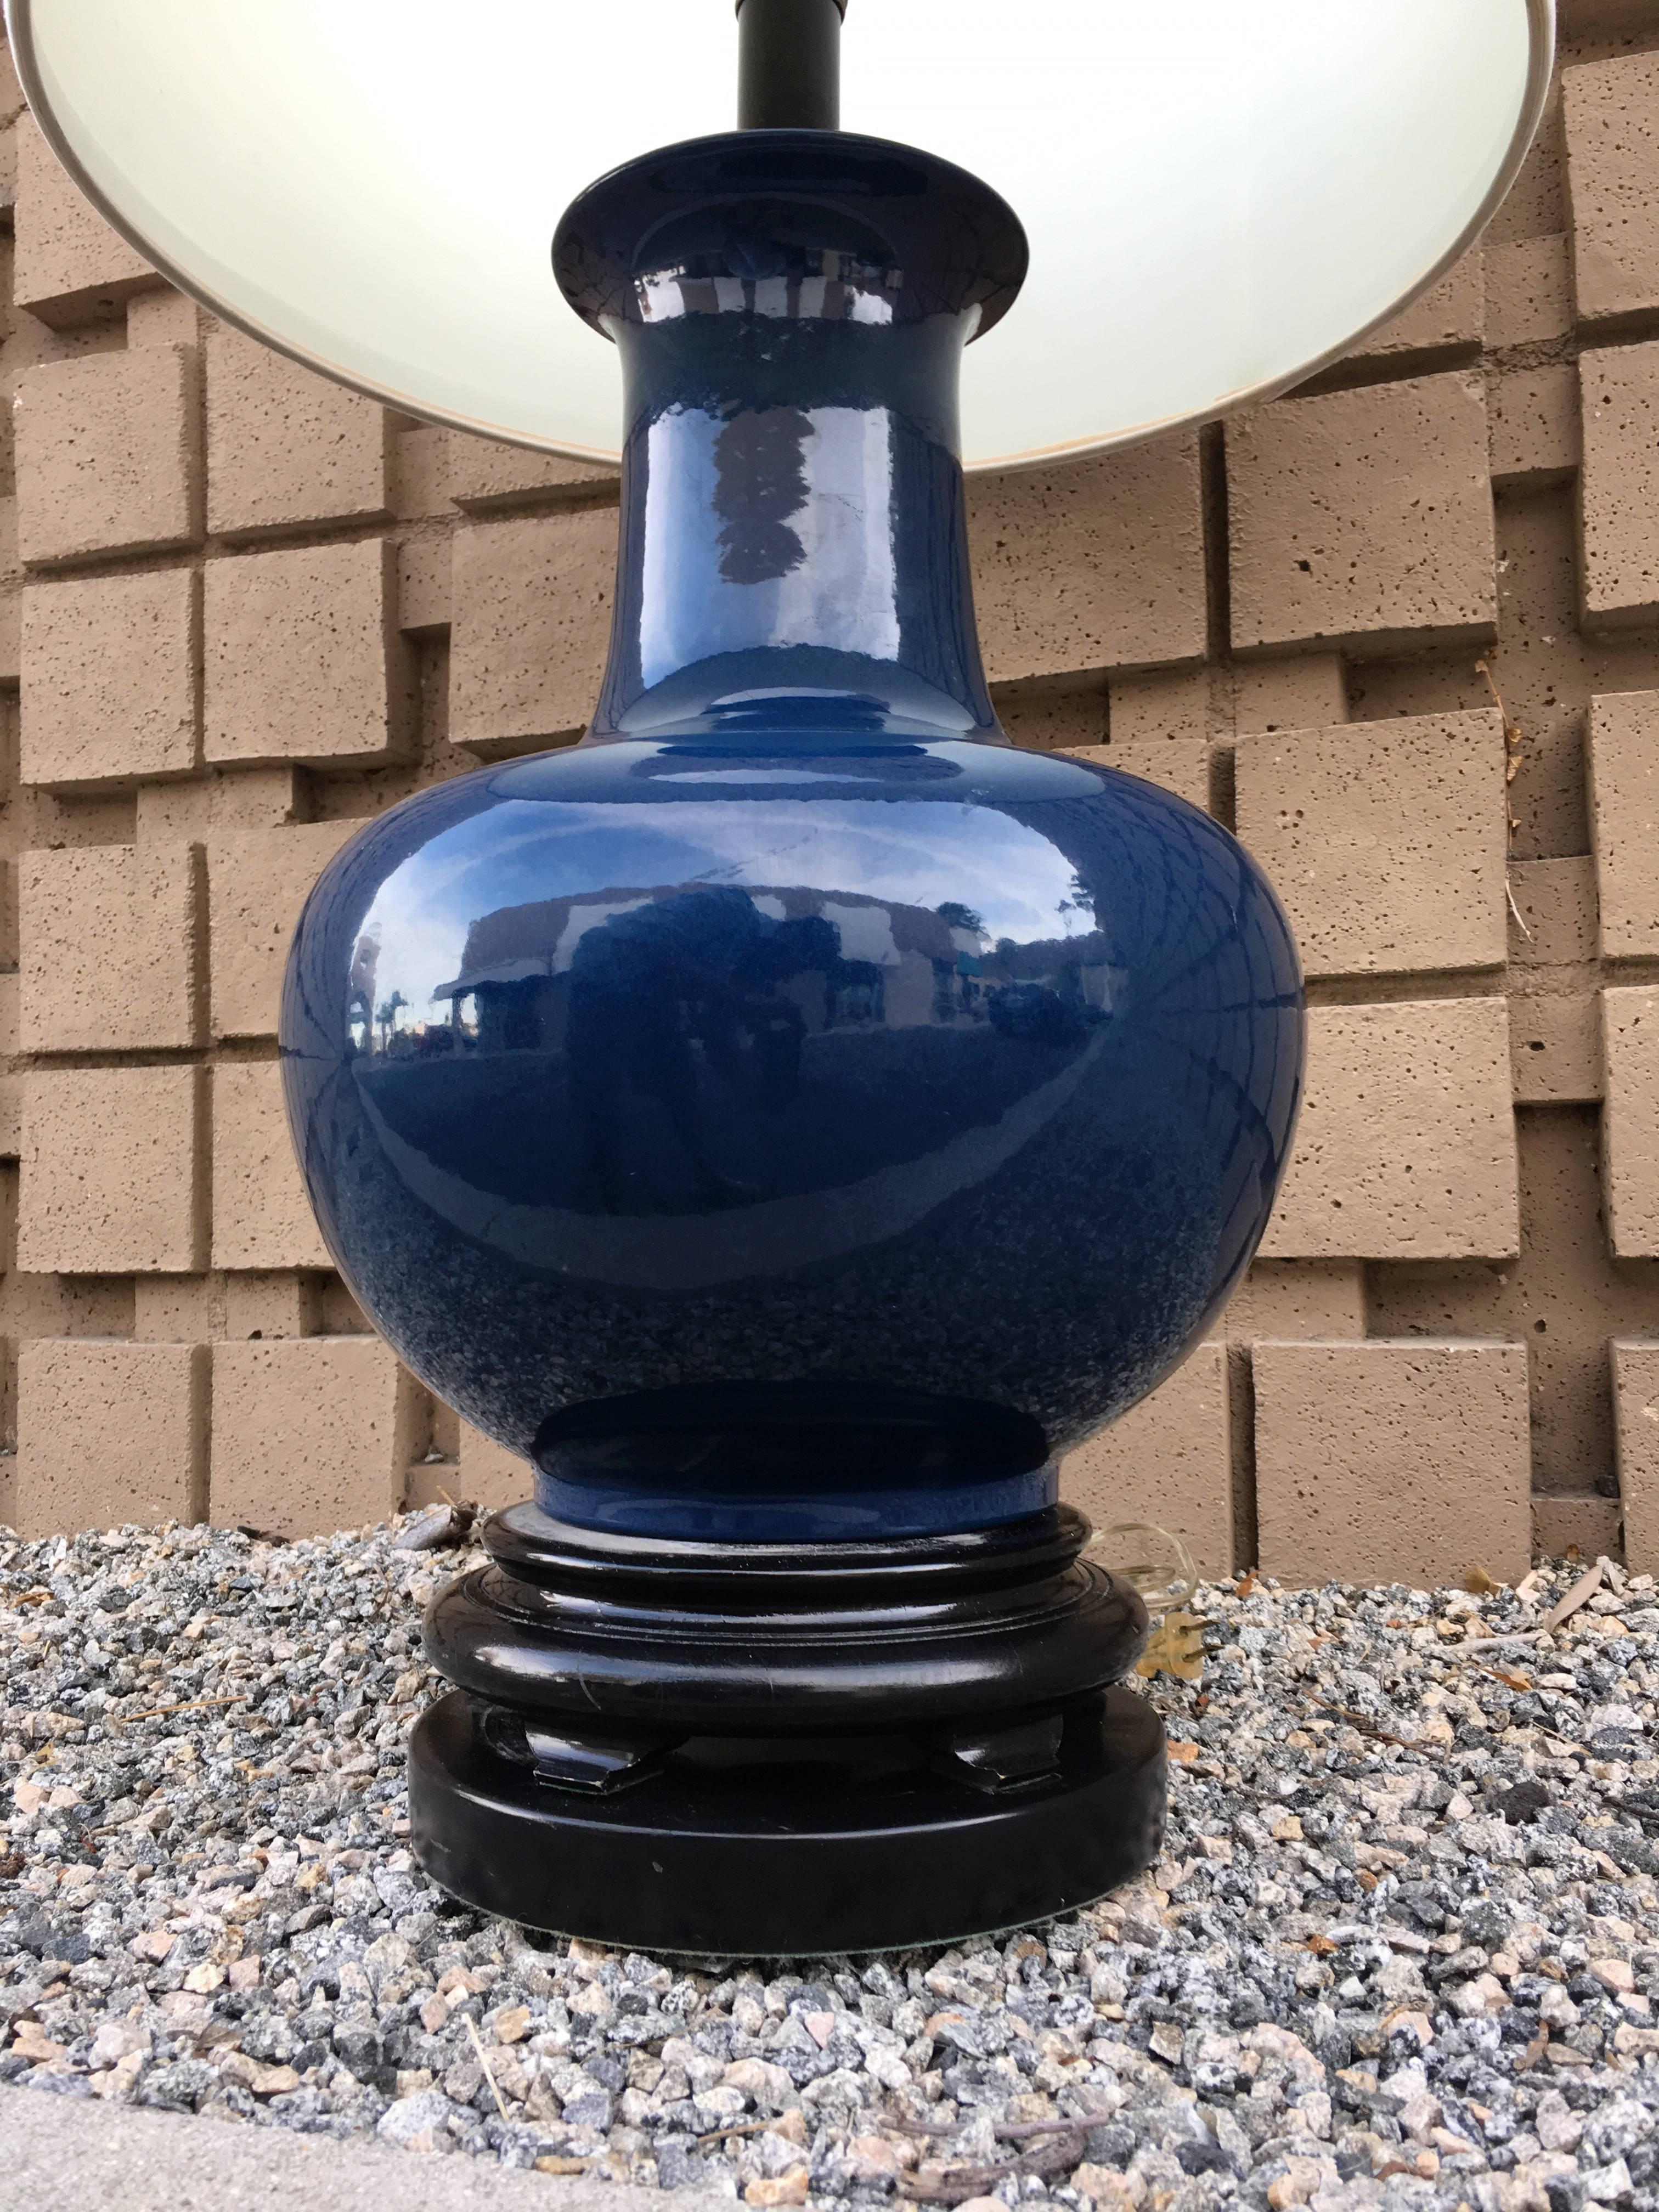 From a very upscale Palm Springs vintage estate, is a large, stylish indigo color ceramic table lamp. The impressive lamp has beautiful original barrel shade and thick black gloss wood base and matching finial. A very chic Mid-Century Modern lamp.